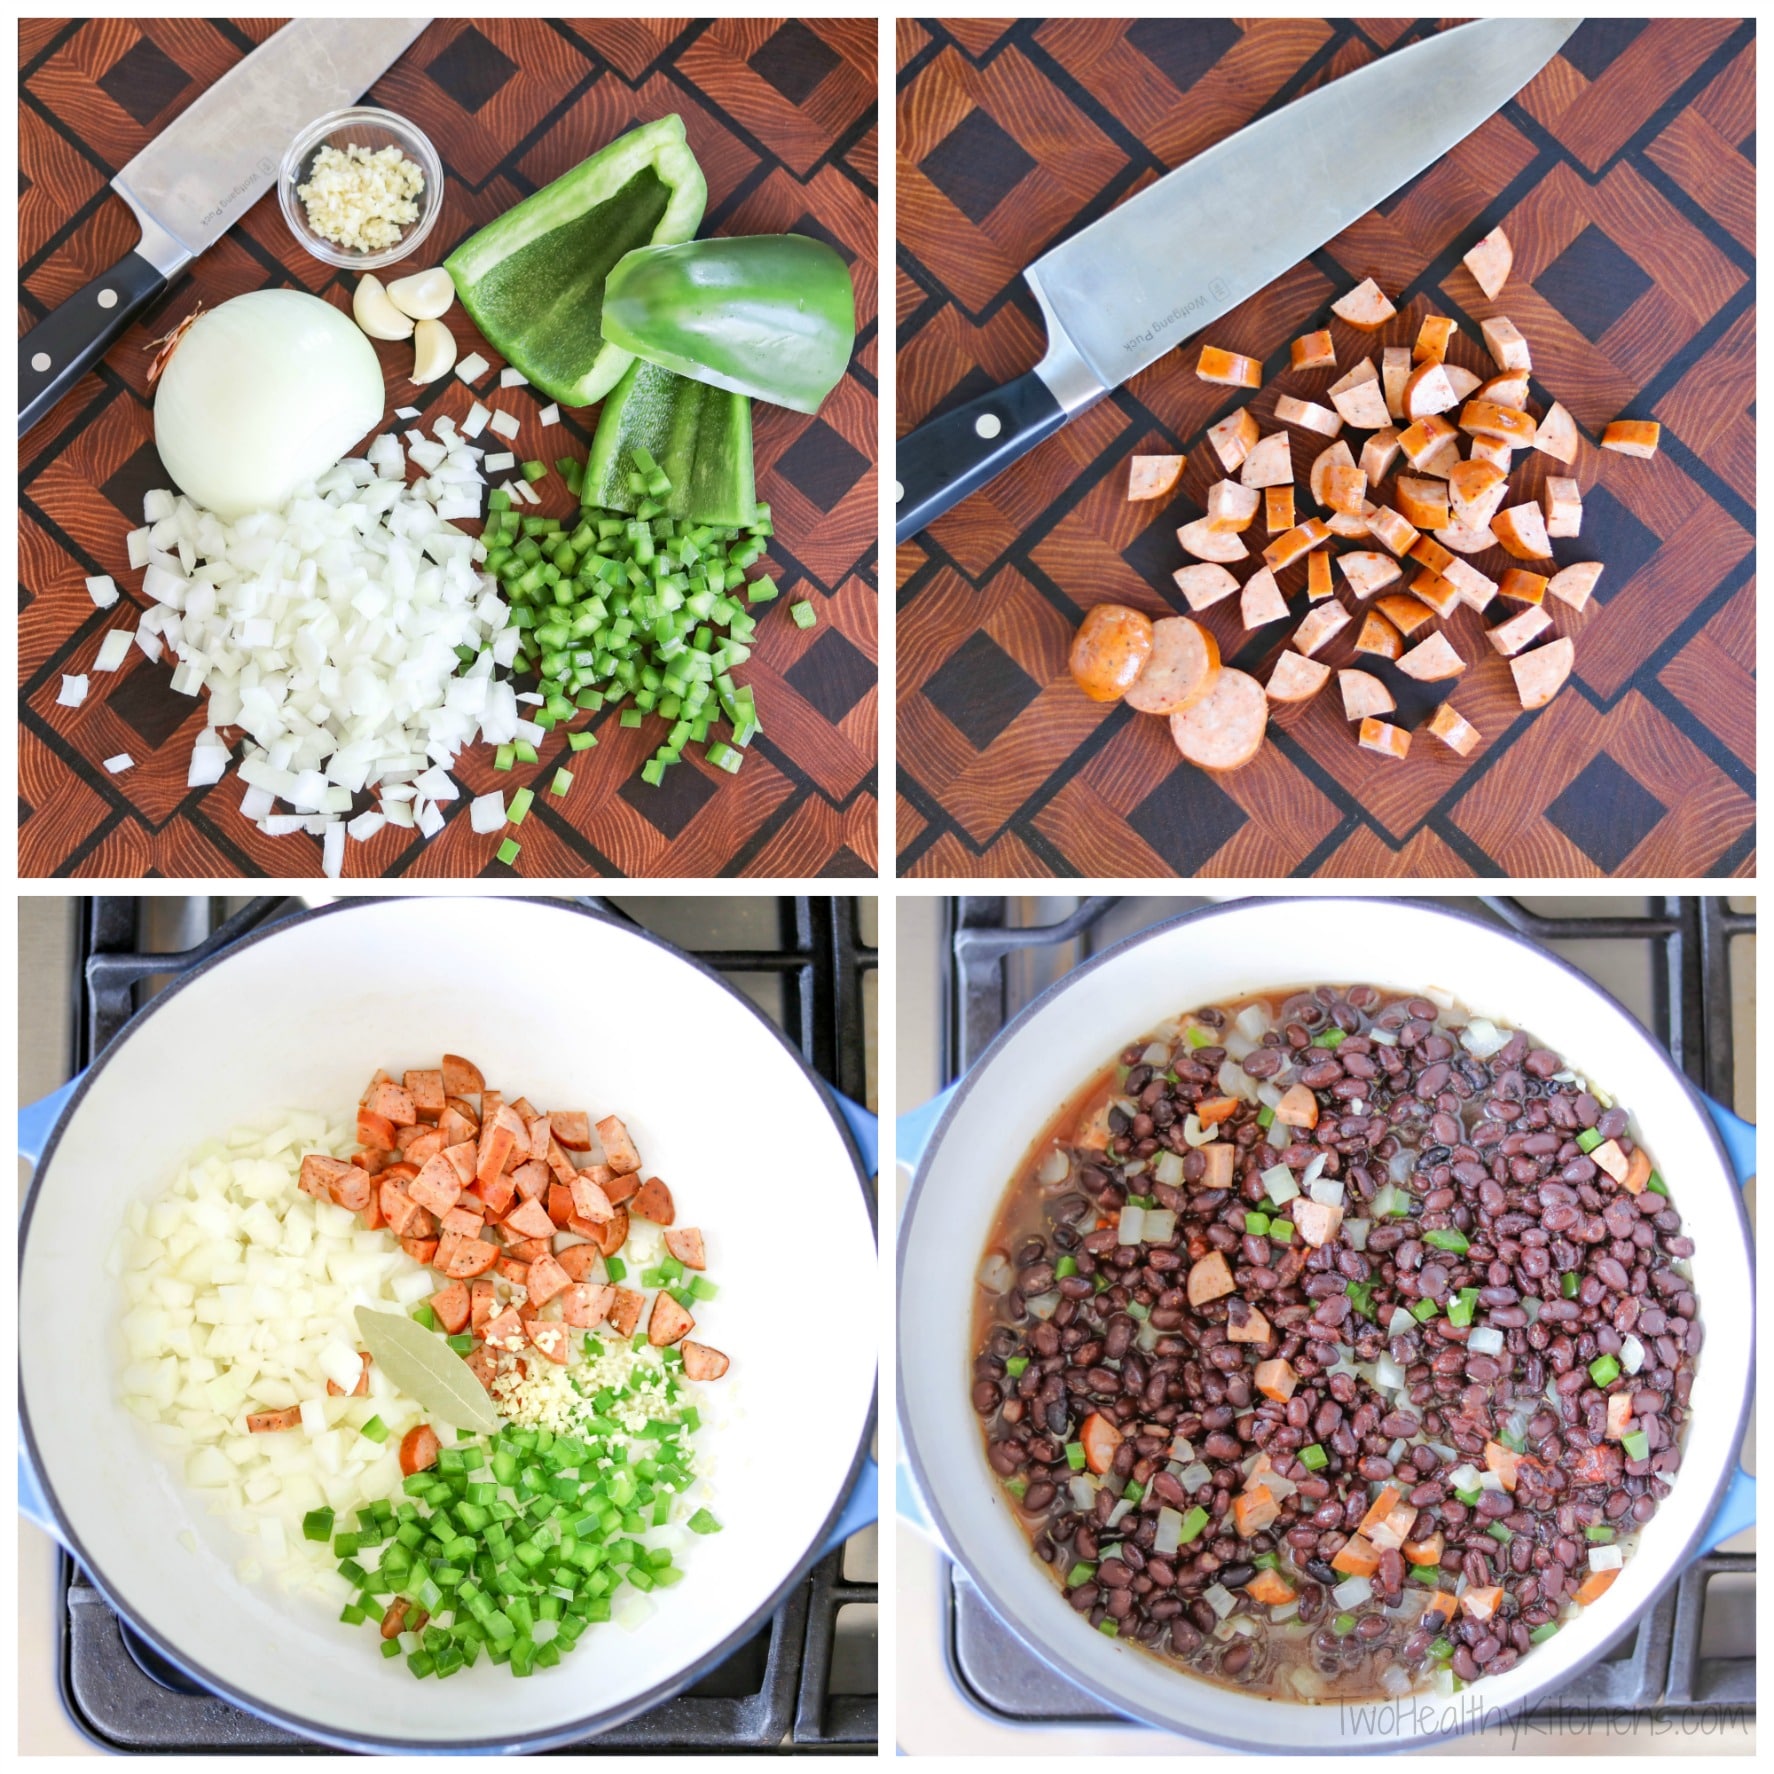 Collage of 4 photos showing steps to make soup: cutting vegetables, cutting sausage, cooking veggies and sausage, adding black beans to soup pot.